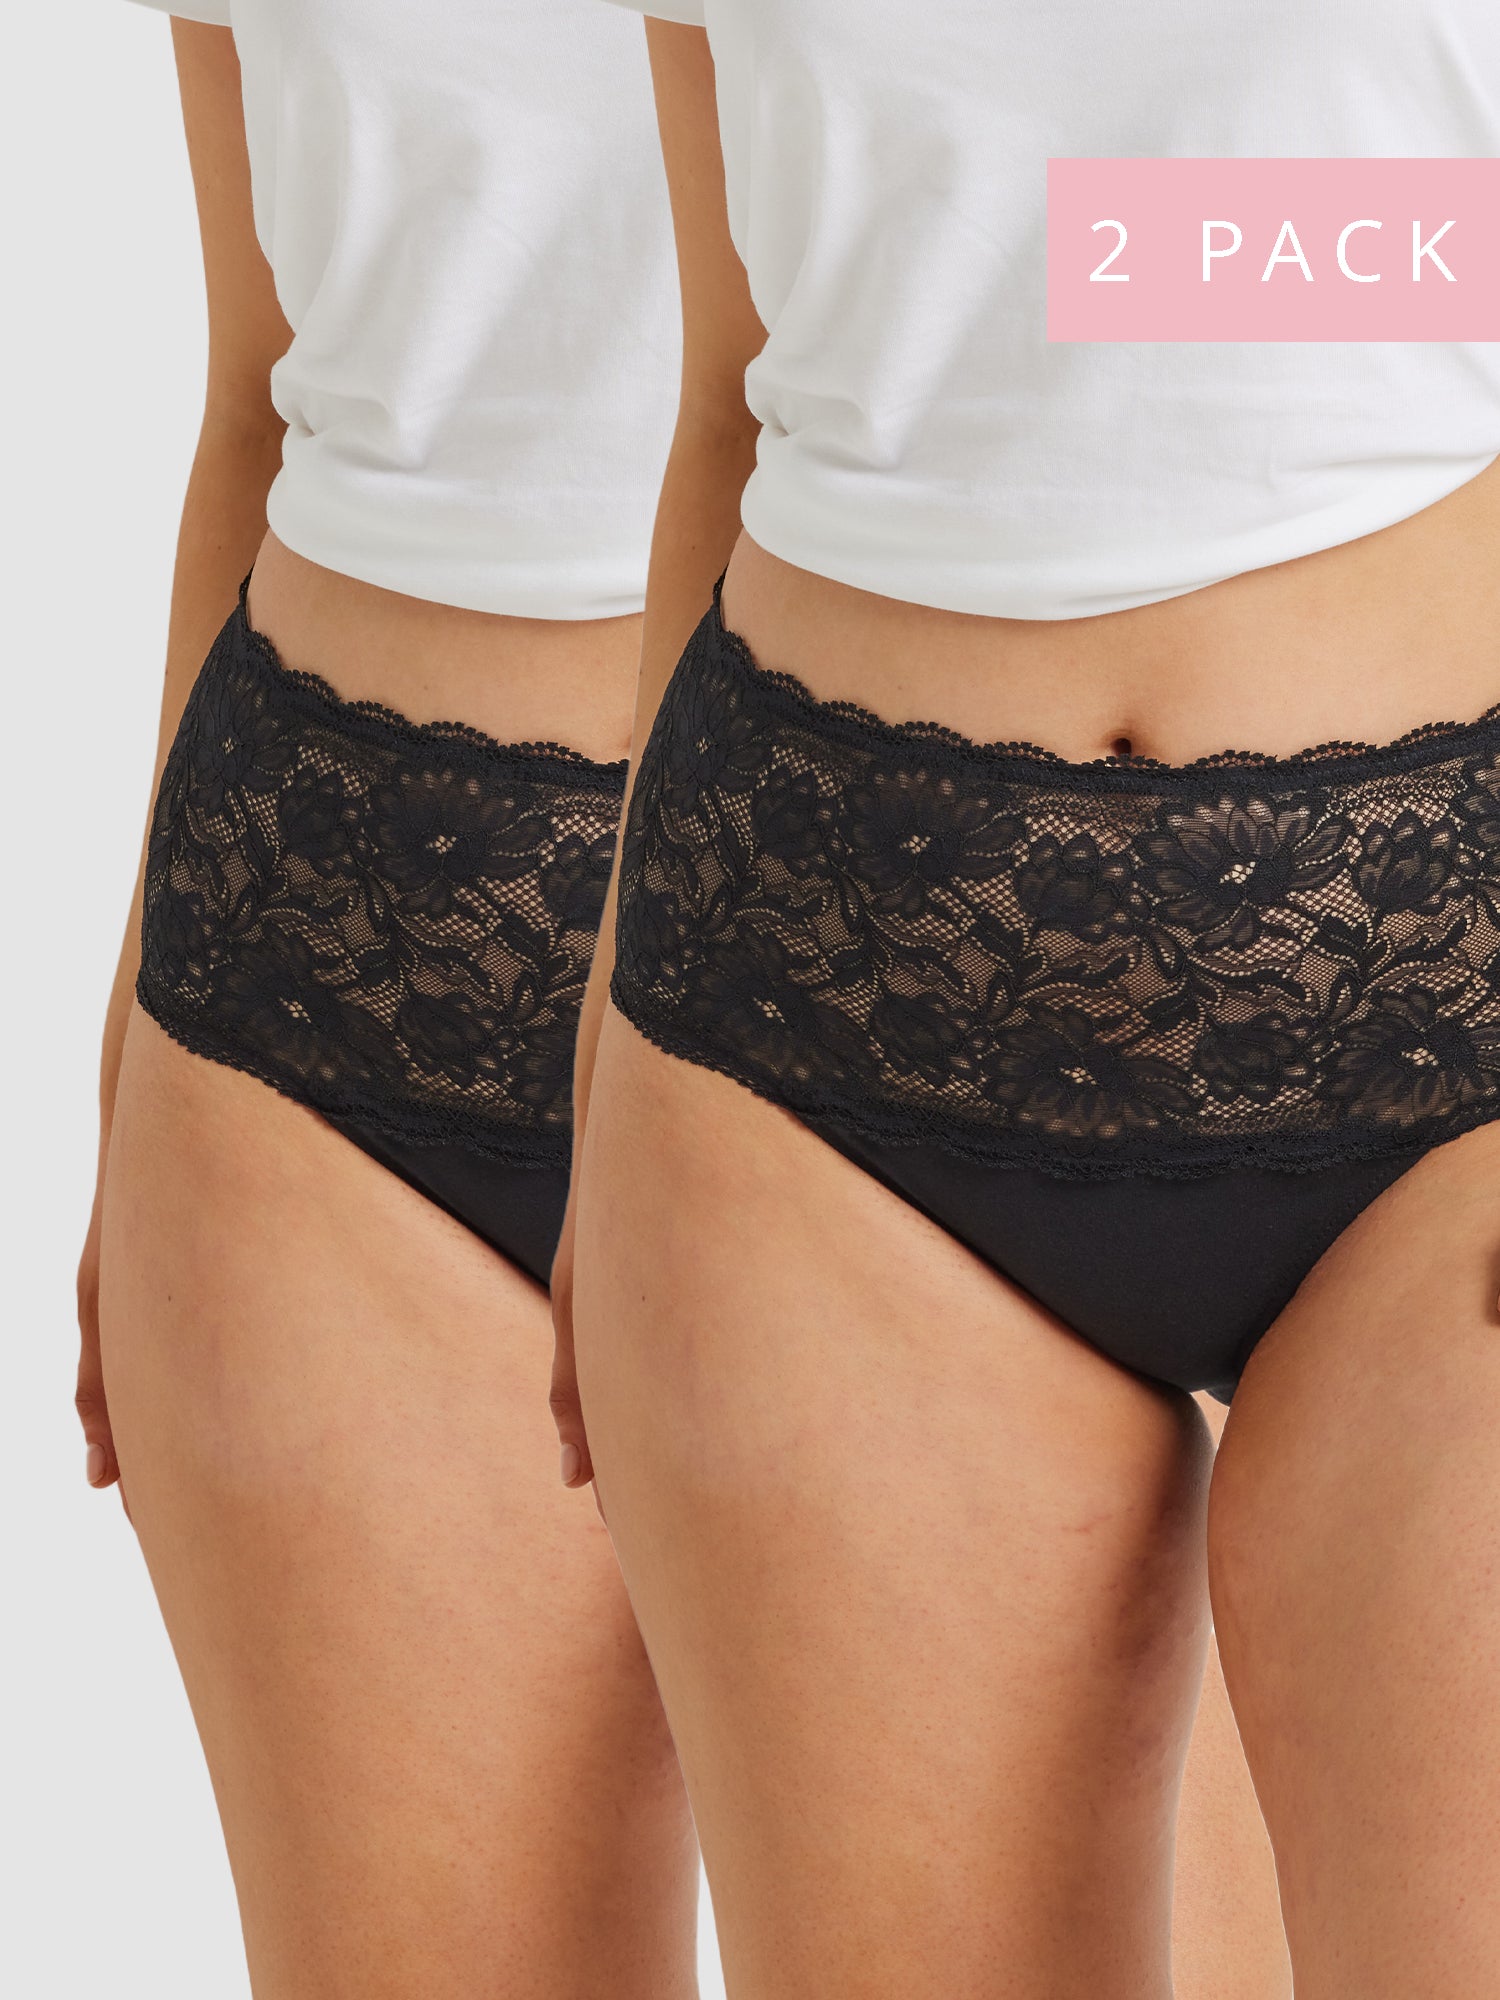 2 Pack Daily Essentials Cotton & Floral Lace Full Brief - Black | Kayser